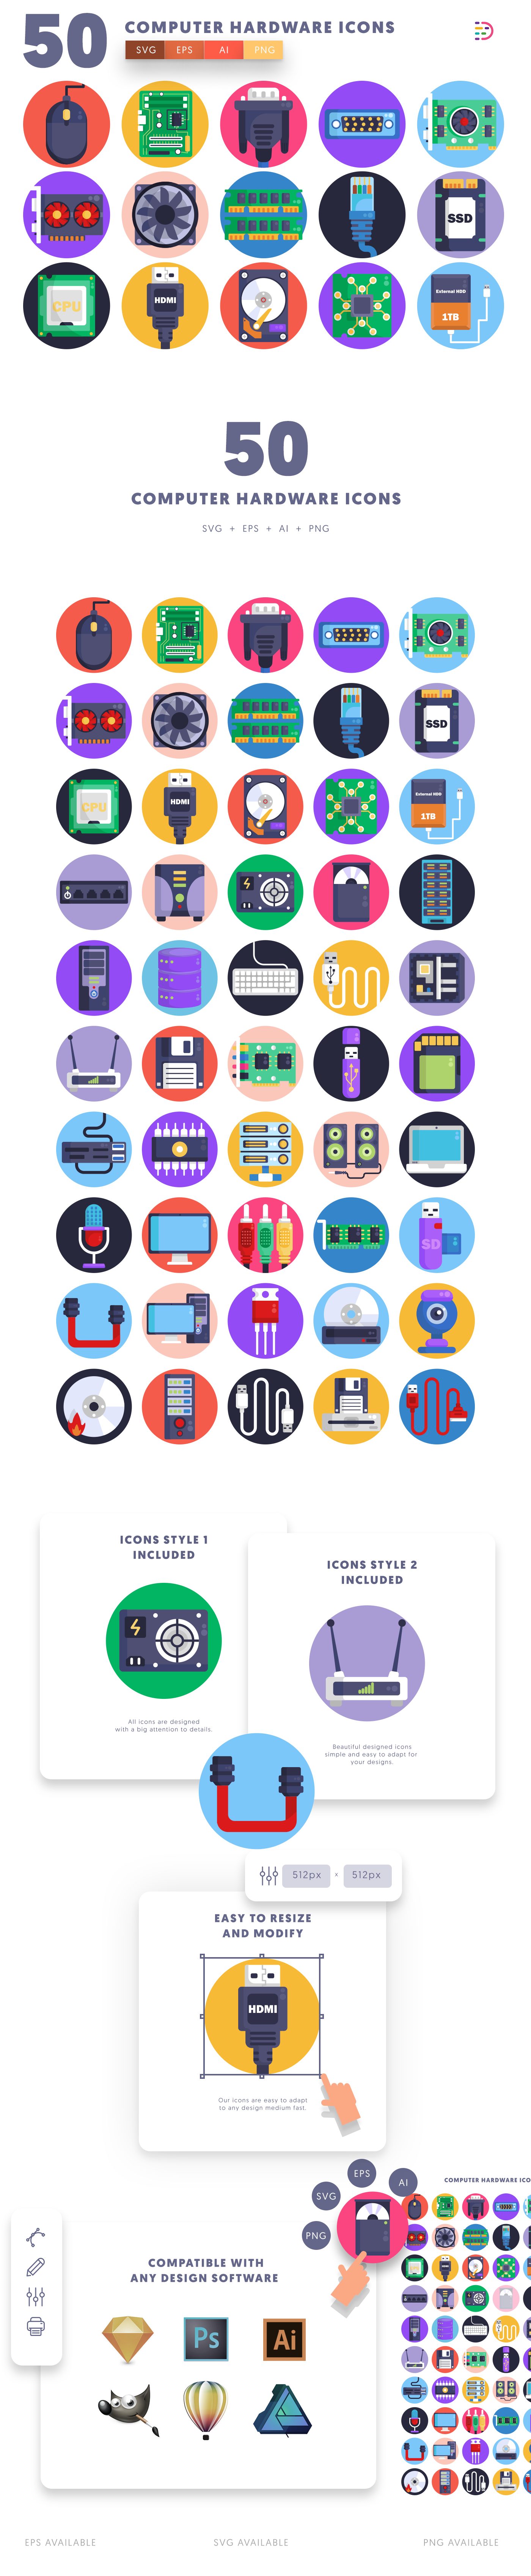 Editable computer hardware icon pack, easy to edit and customize icons